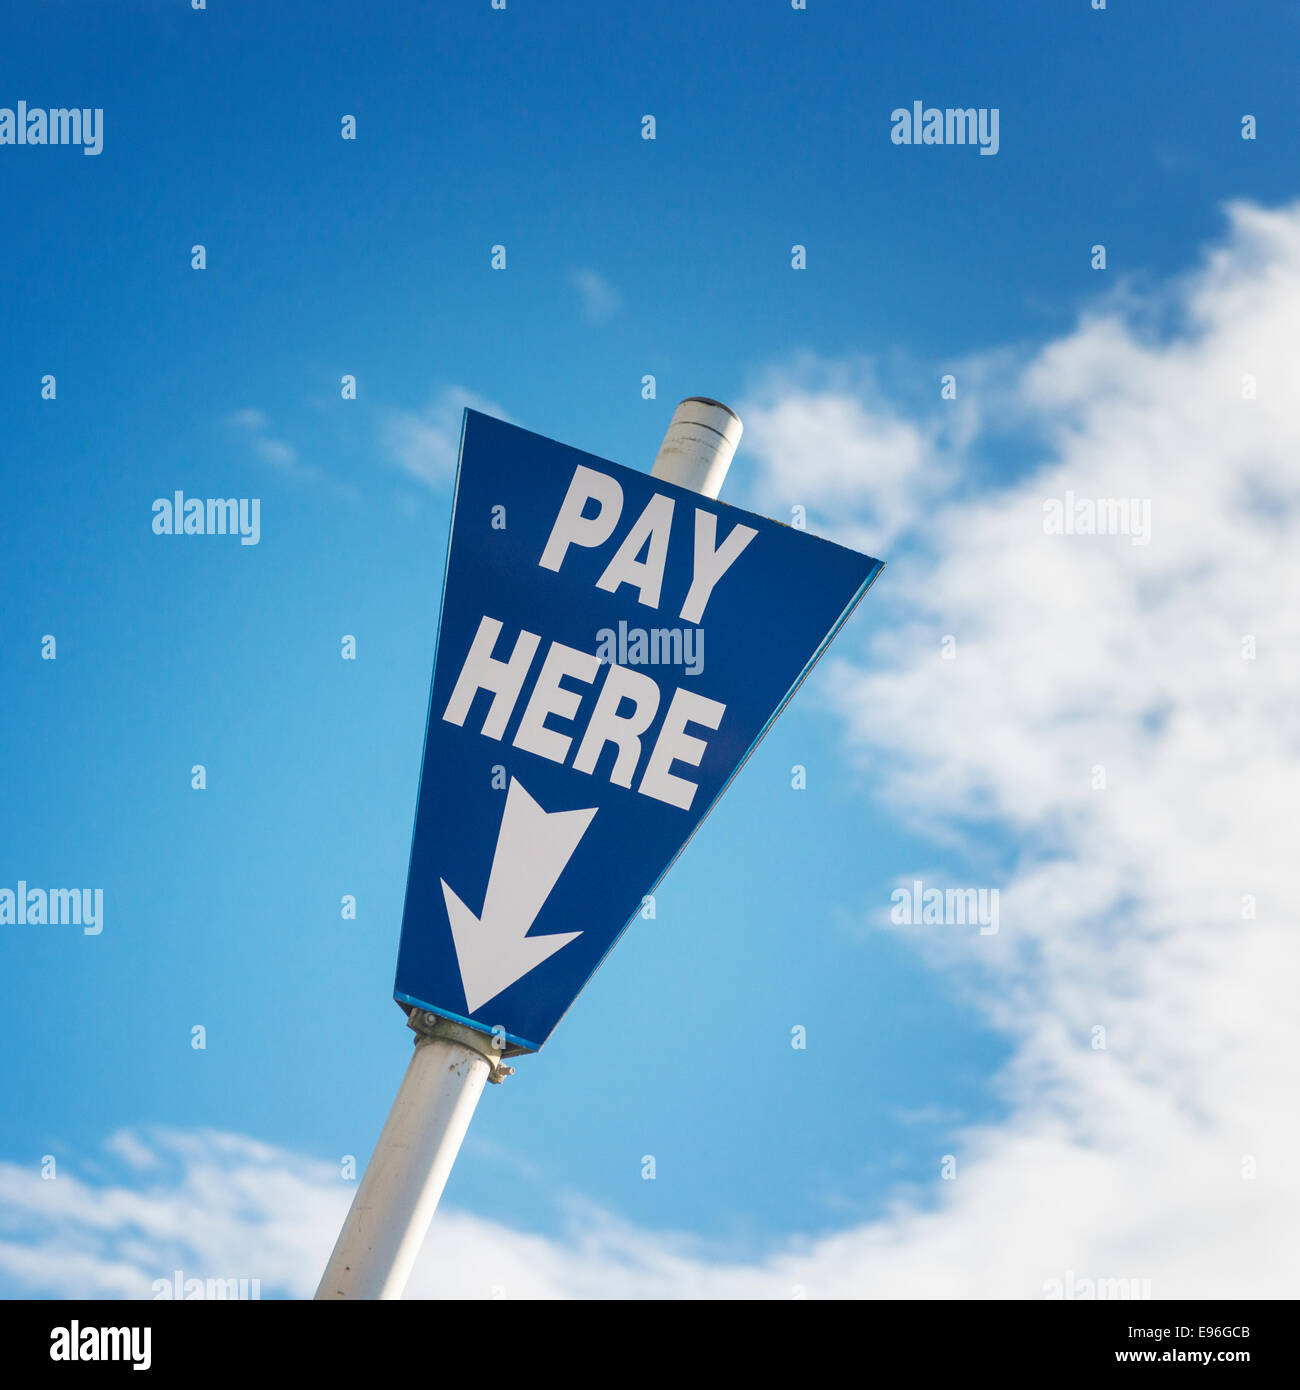 A pay here sign in a car park against a blue sky. Stock Photo